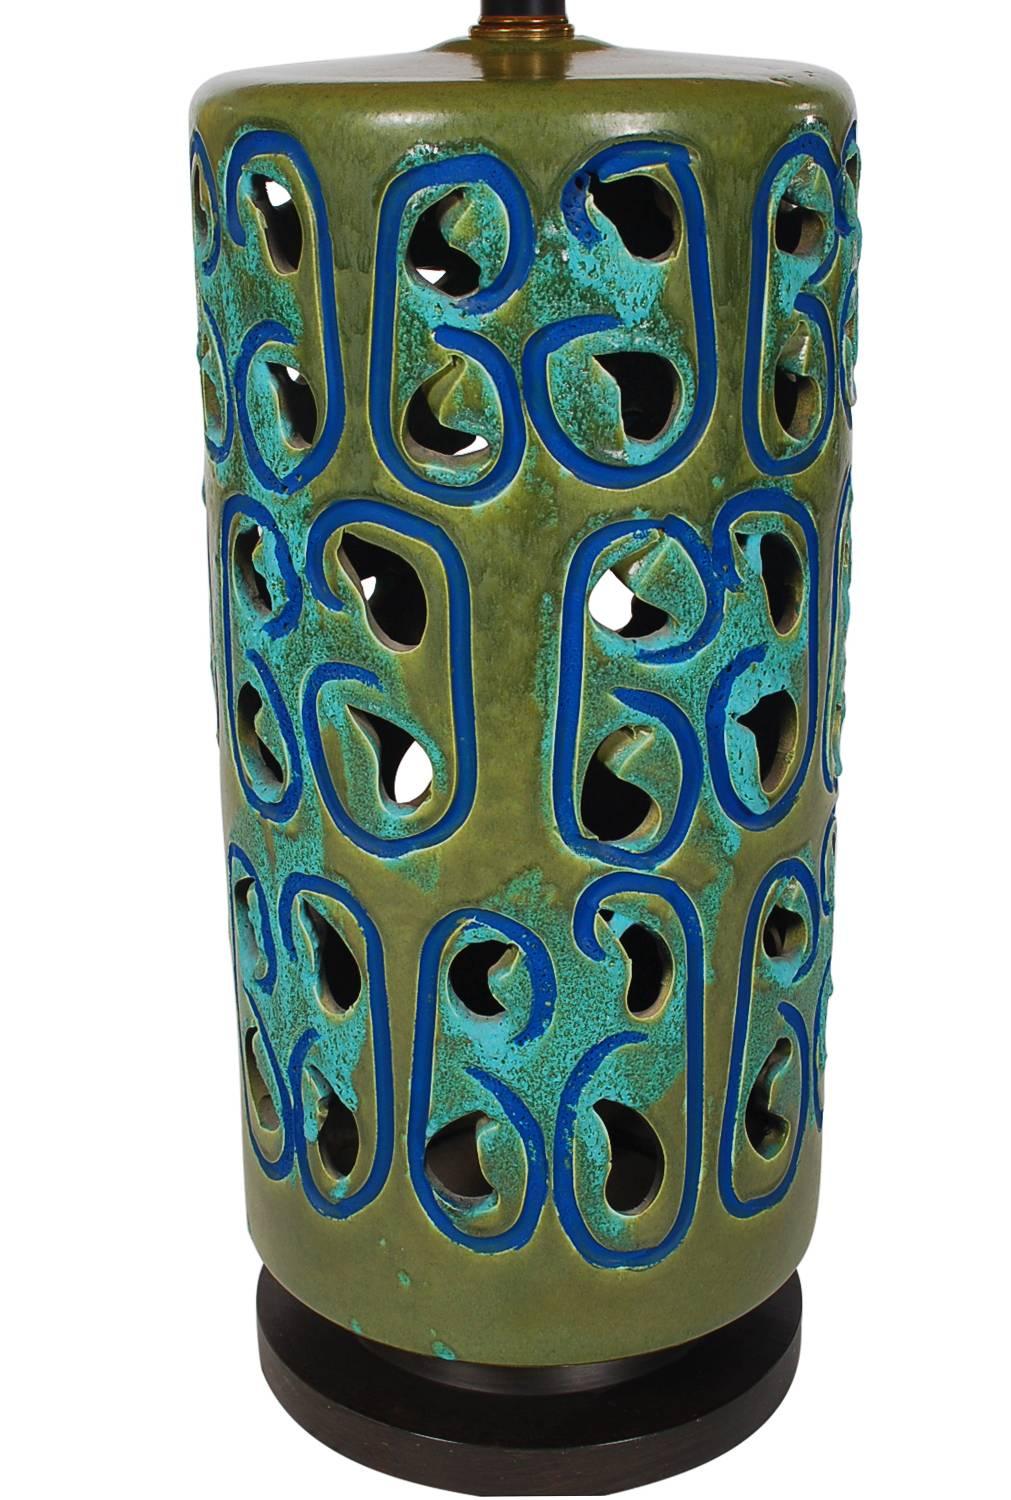 A huge stately glazed ceramic Mid-Century Modern table lamp. A beautiful blue and green color palette with the original shade. Tested, fully working and very well cared for through the years. 

In the style of: Aldo Londi, Bitossi, Raymour,